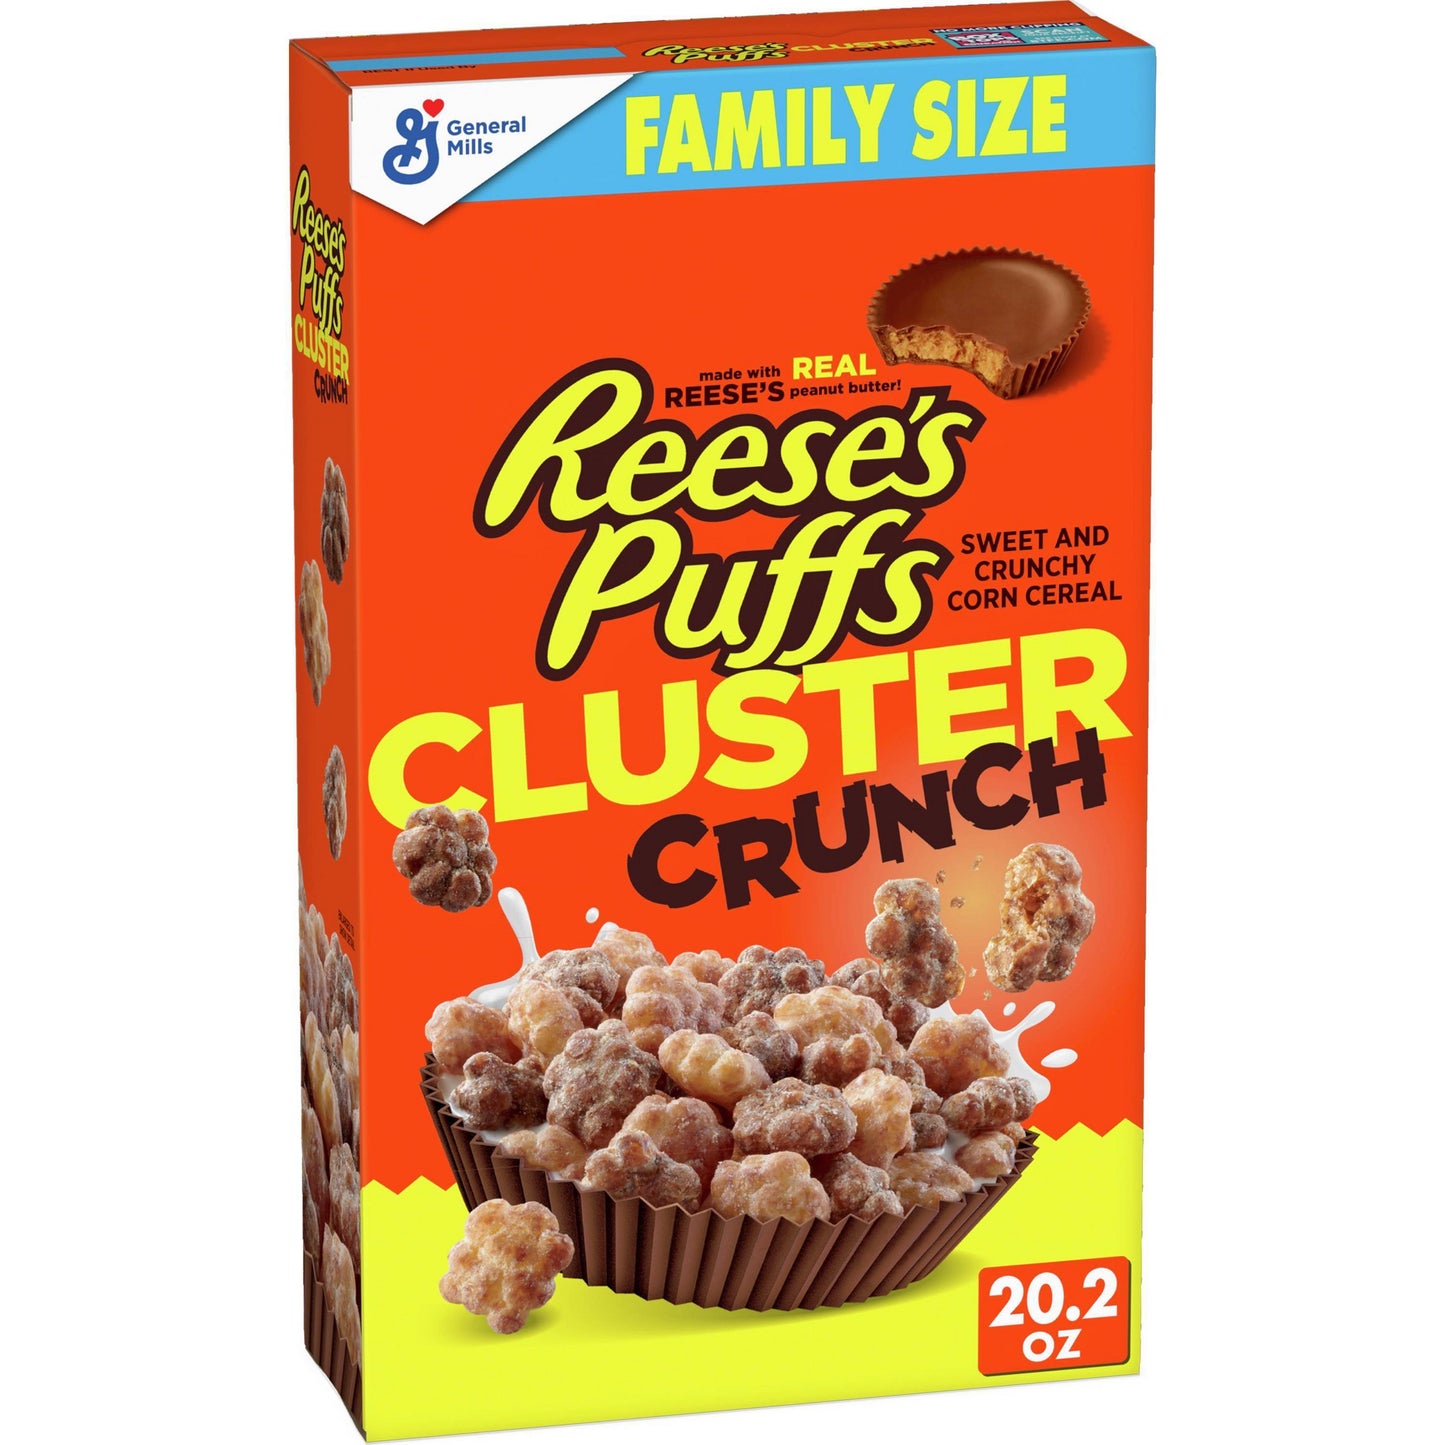 Reese's Puffs Cluster Crunch Family Size Cereal - 19.7 oz